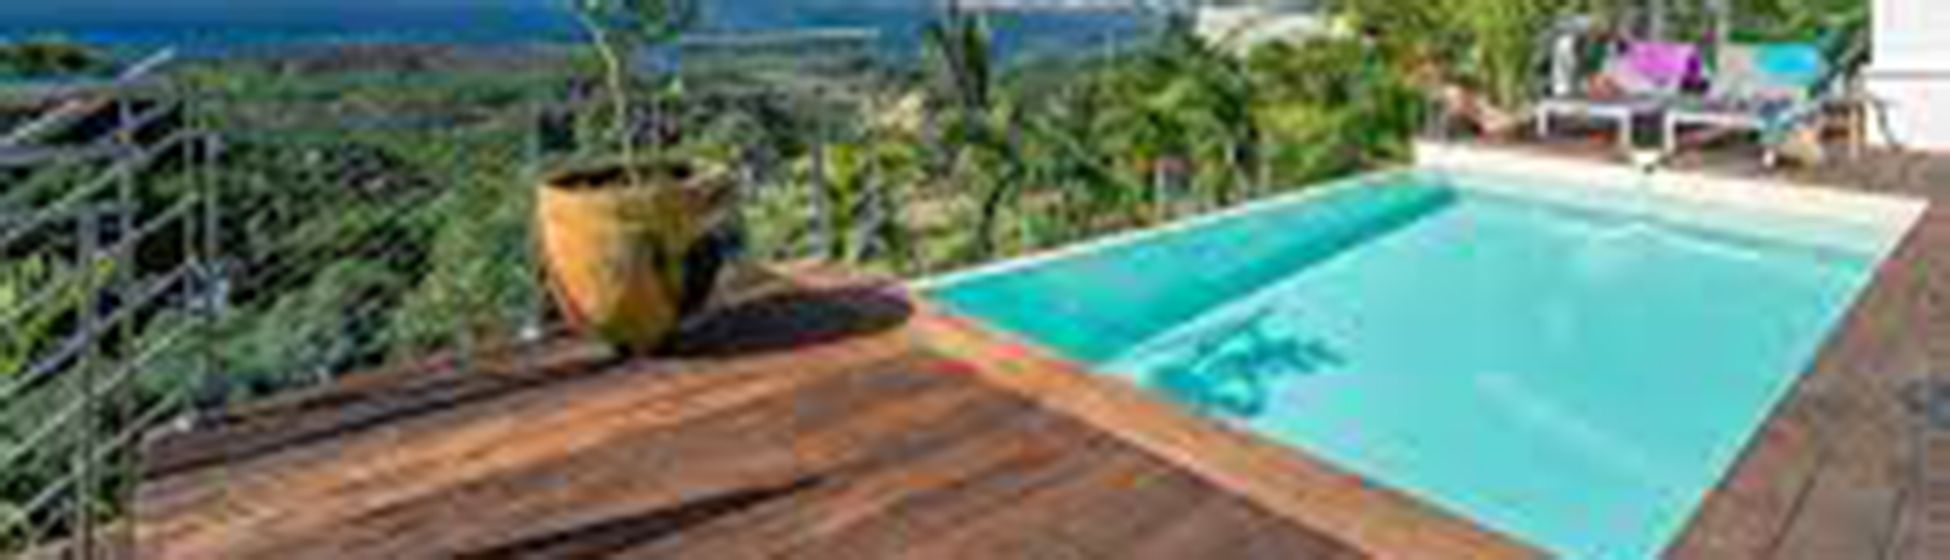 Location residence vacances martinique